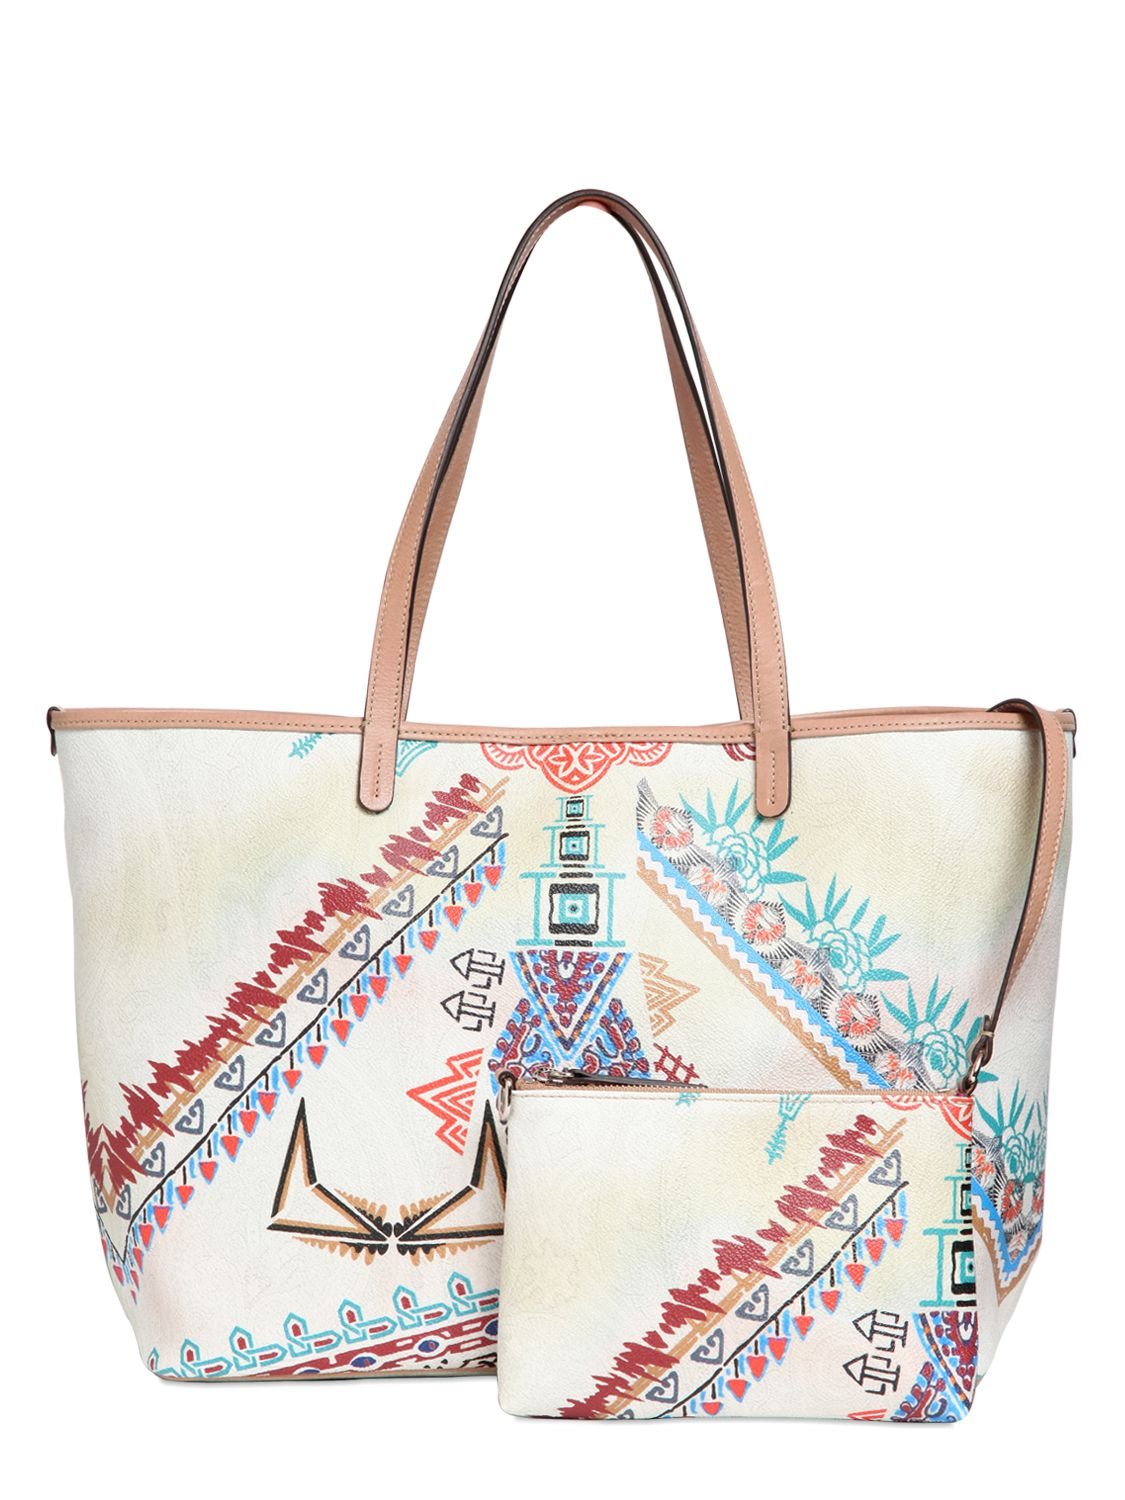 Lyst - Etro Print Coated Canvas Tote Bag